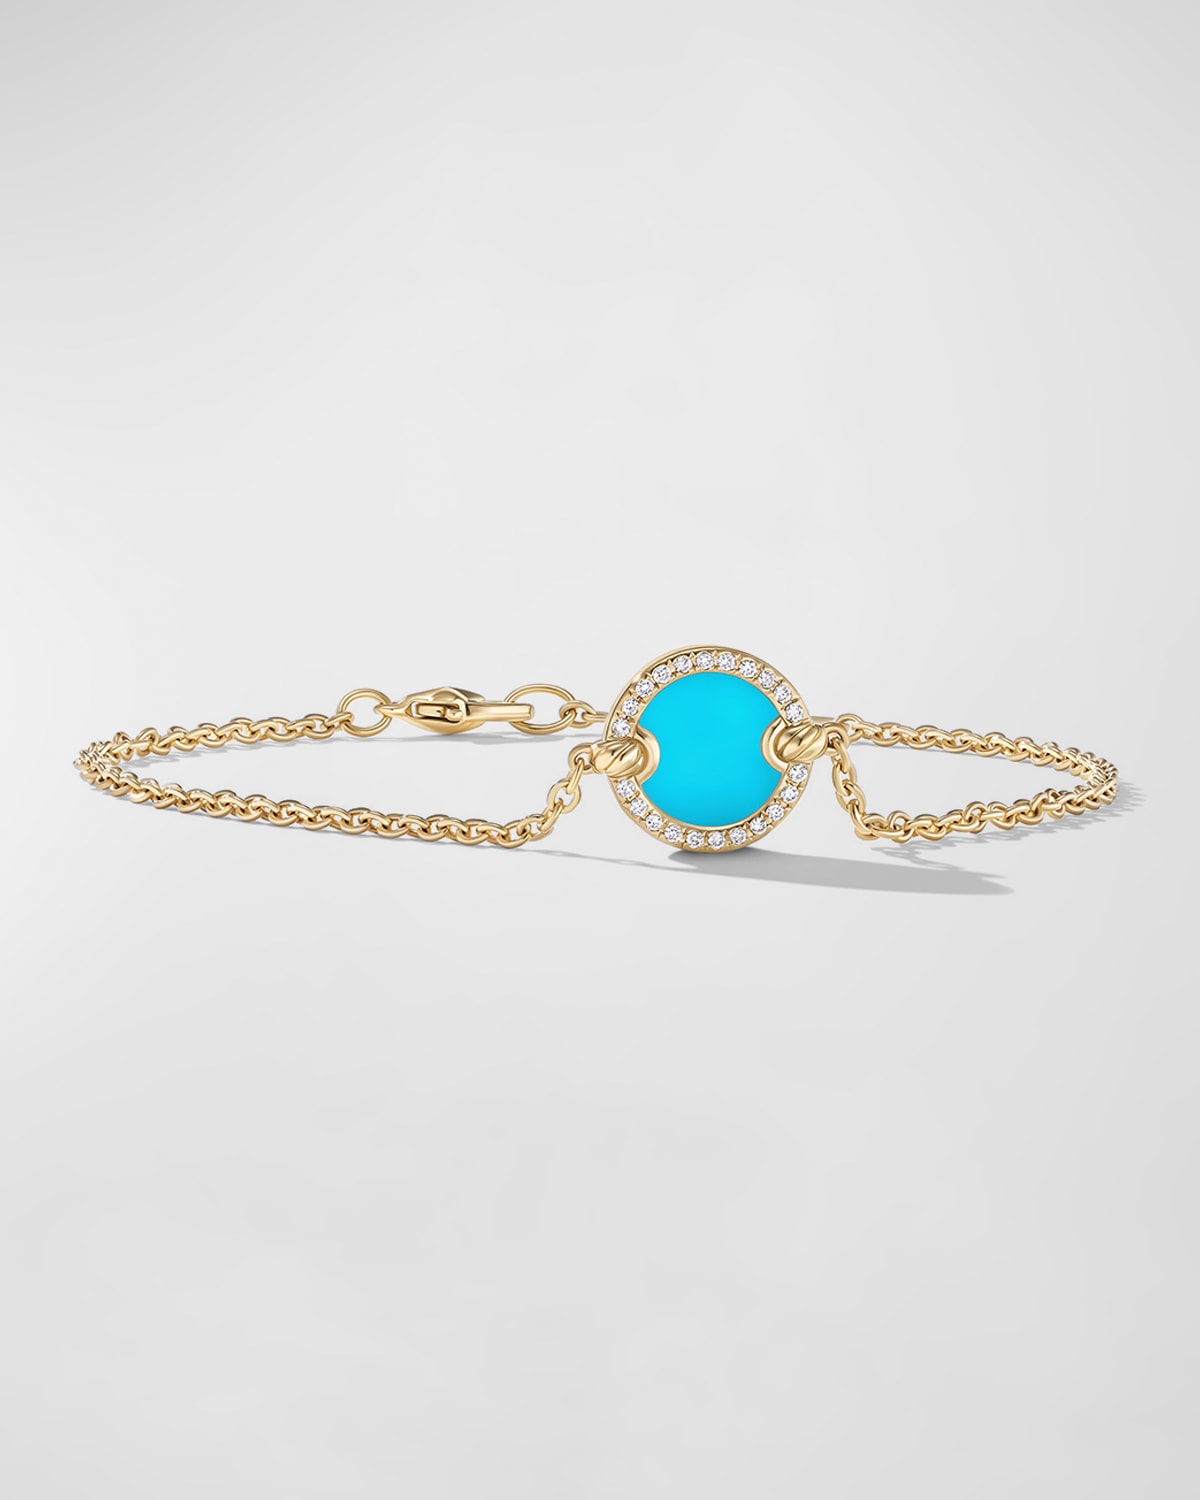 David Yurman Women's Dy Elements Center Station Chain Bracelet In 18k Yellow Gold With Pavé Diamonds In Turquoise